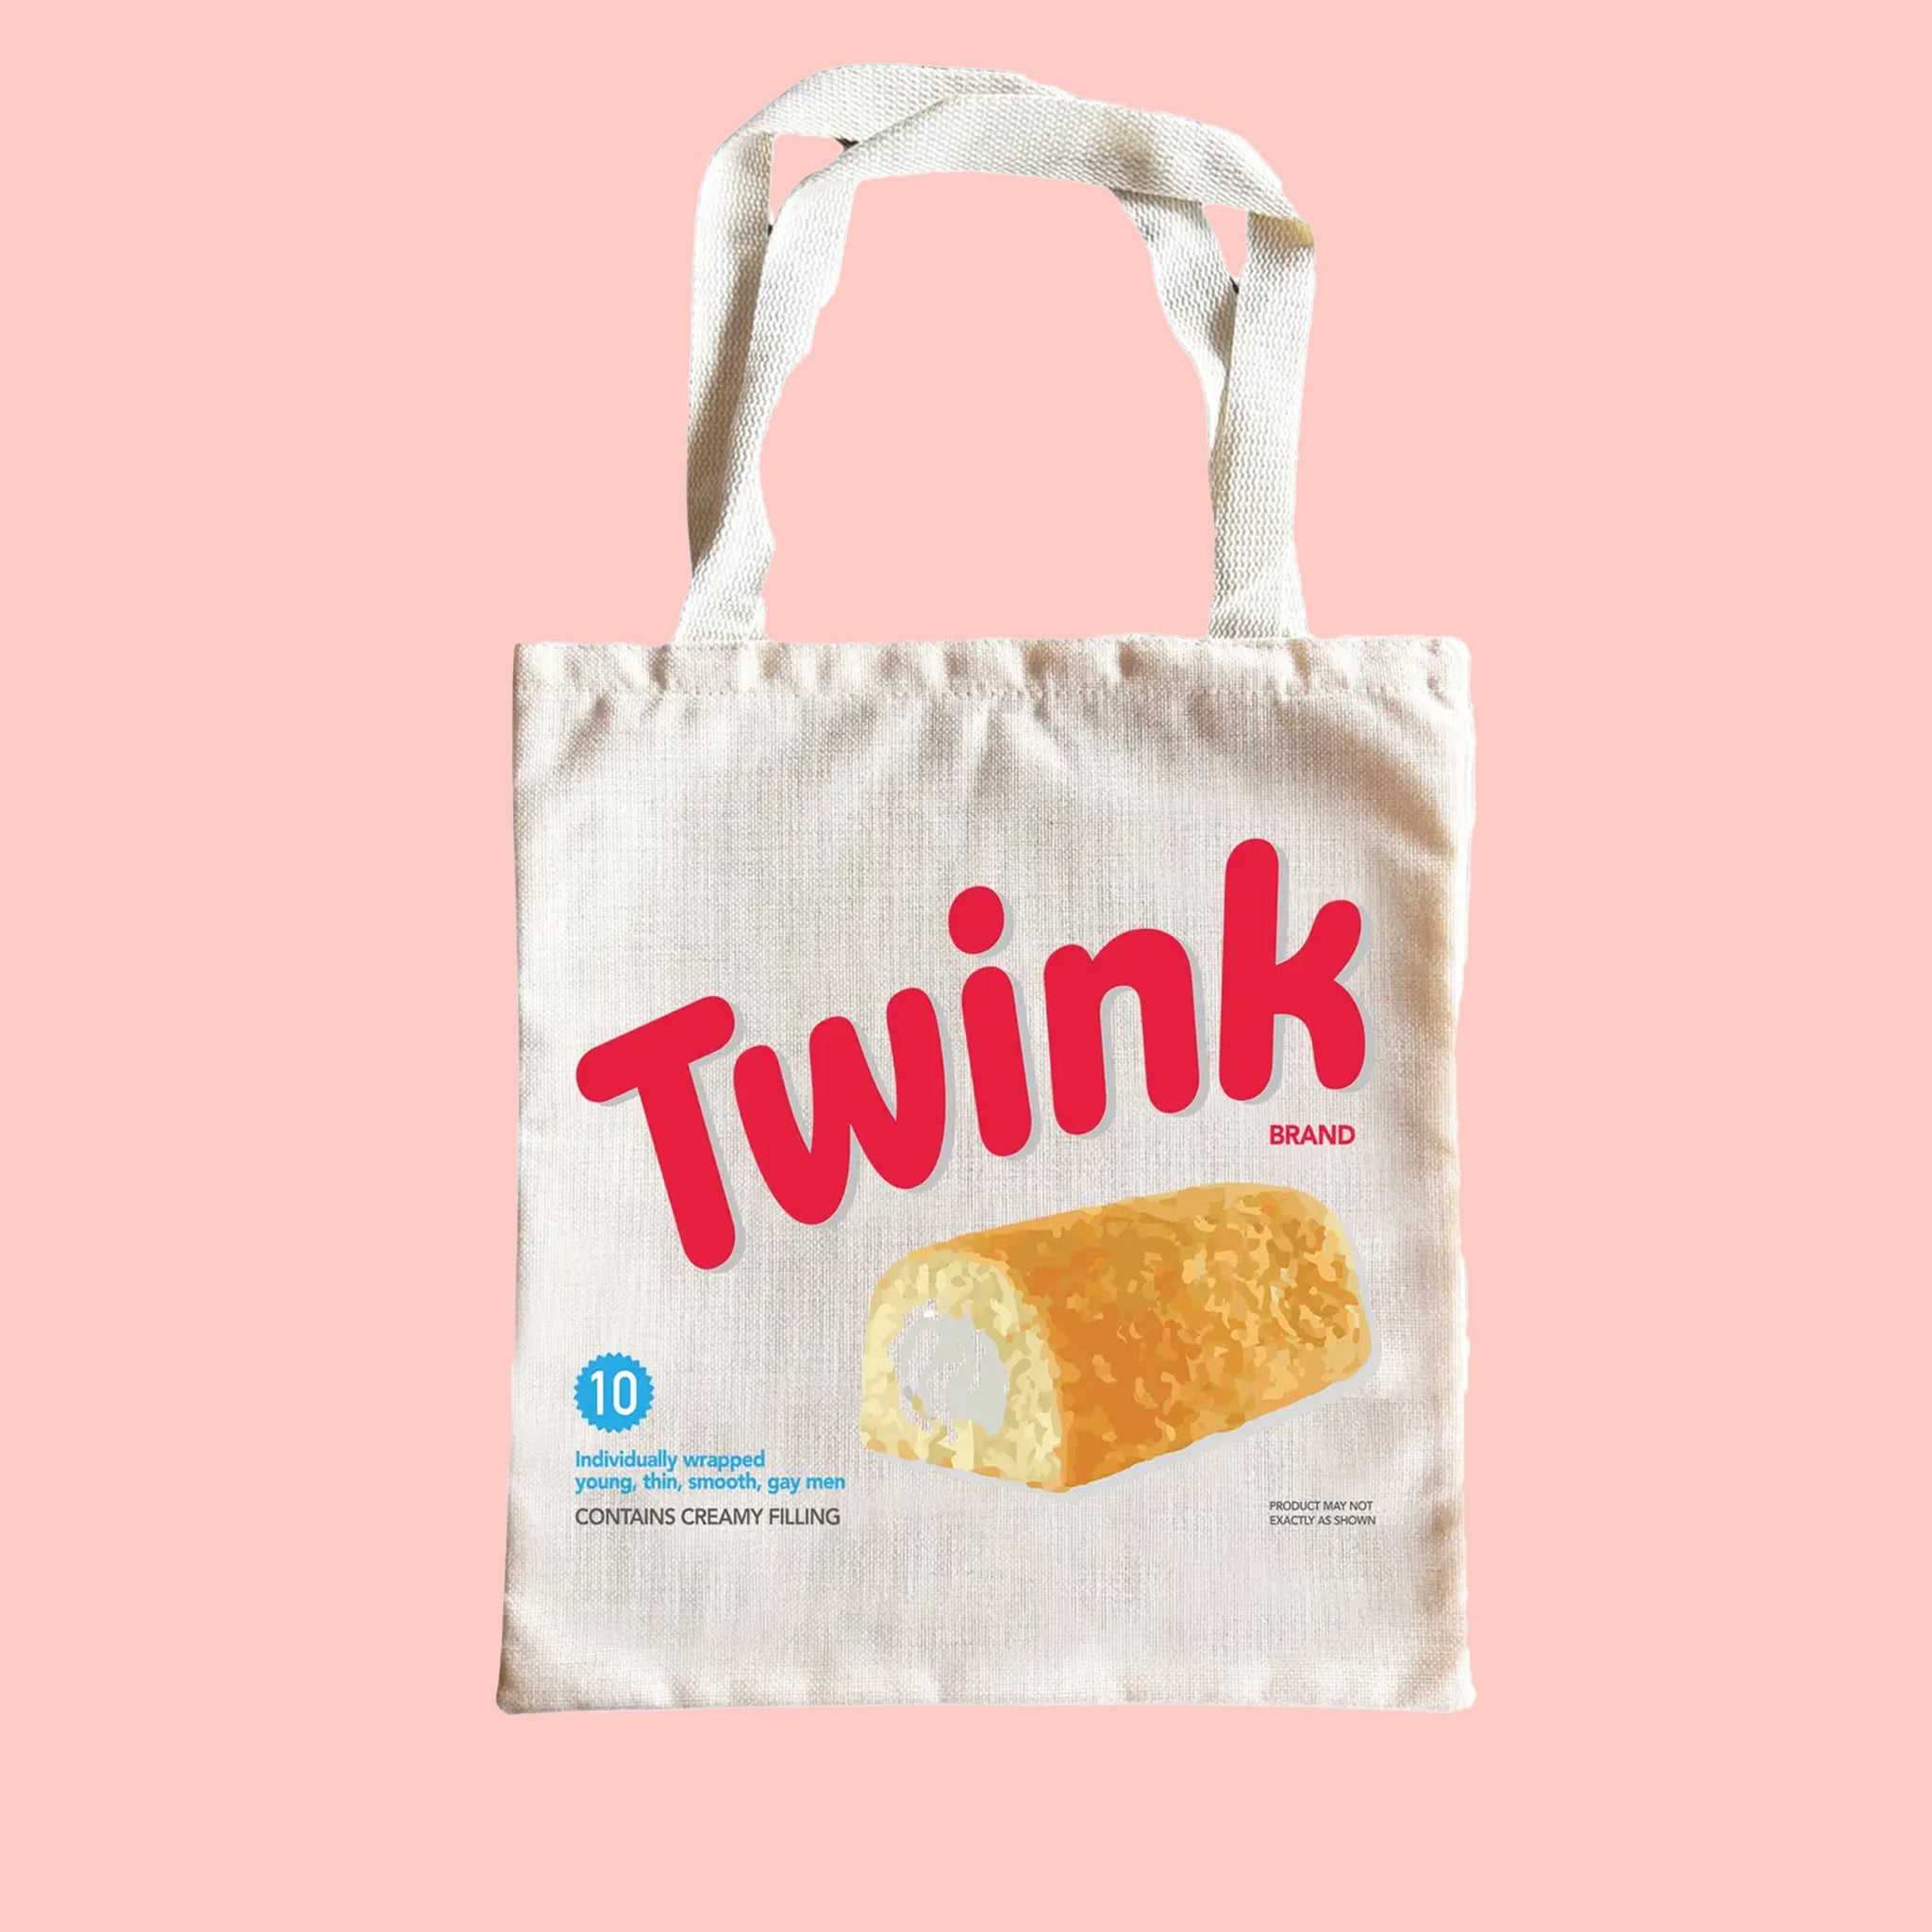 On a light pink background is a tote bag with a twinky design and red text that reads, "Twink". 